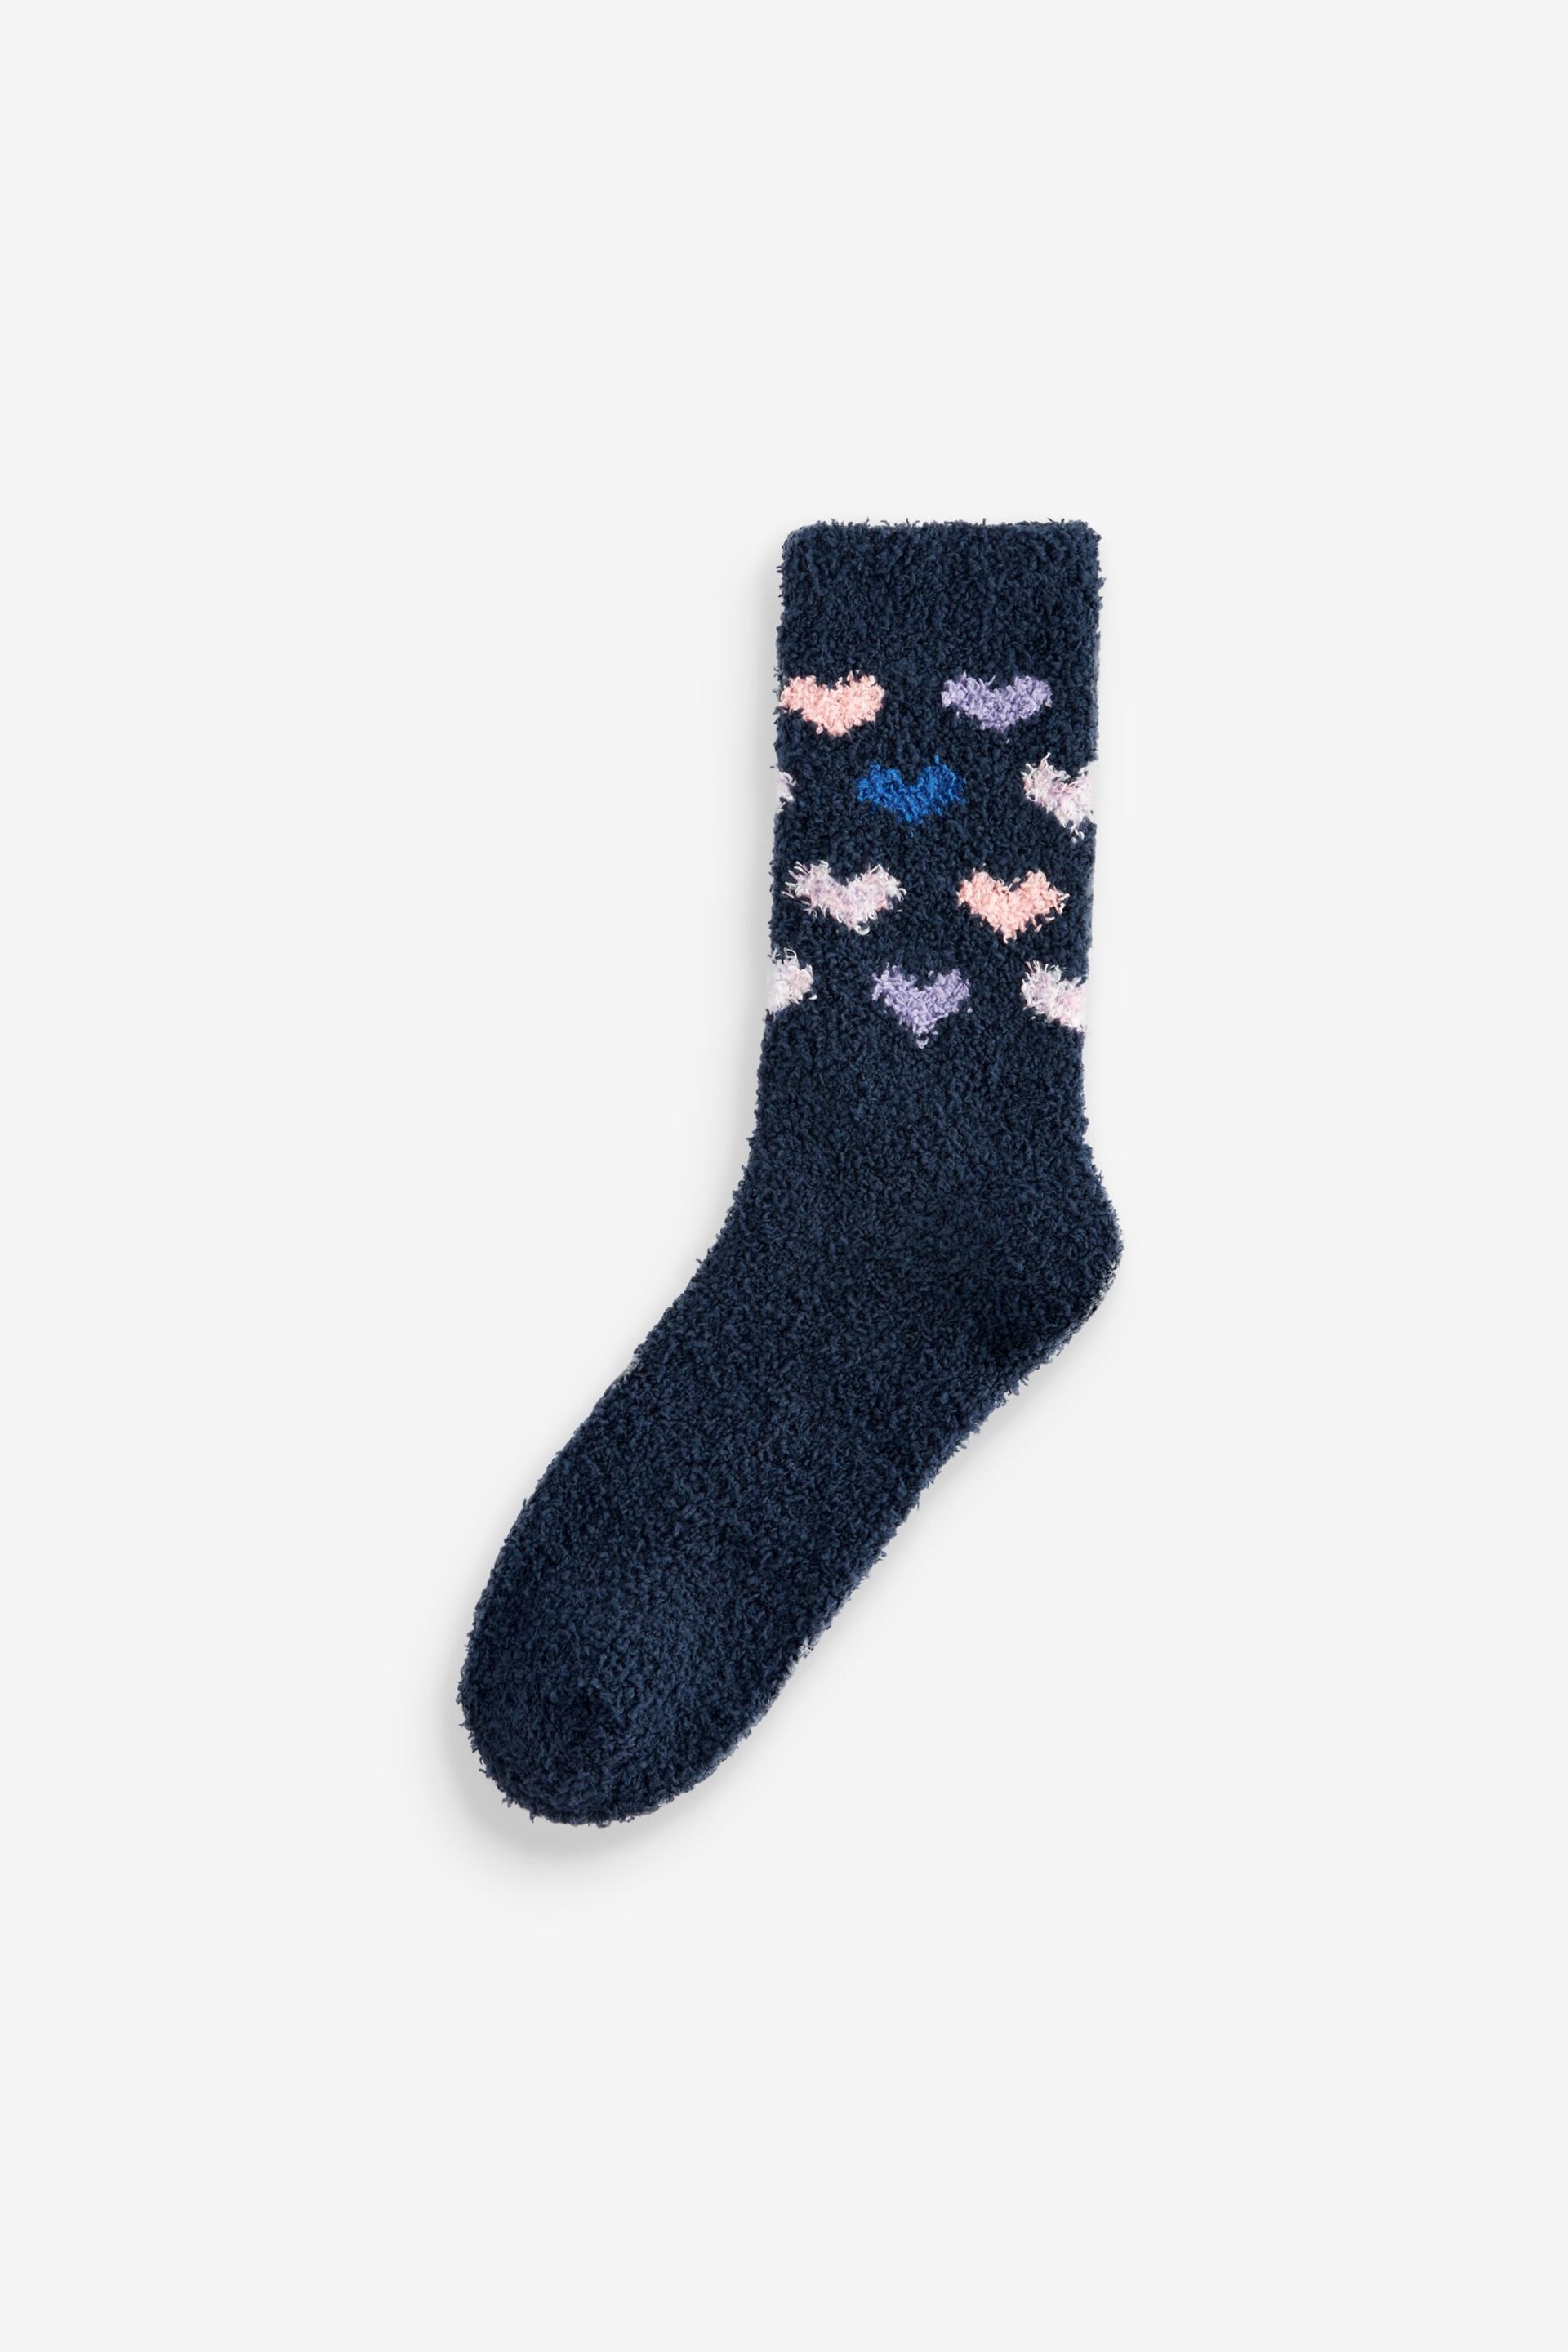 Navy/Purple Hearts Cosy Ankle Socks 2 Pack - Image 2 of 2